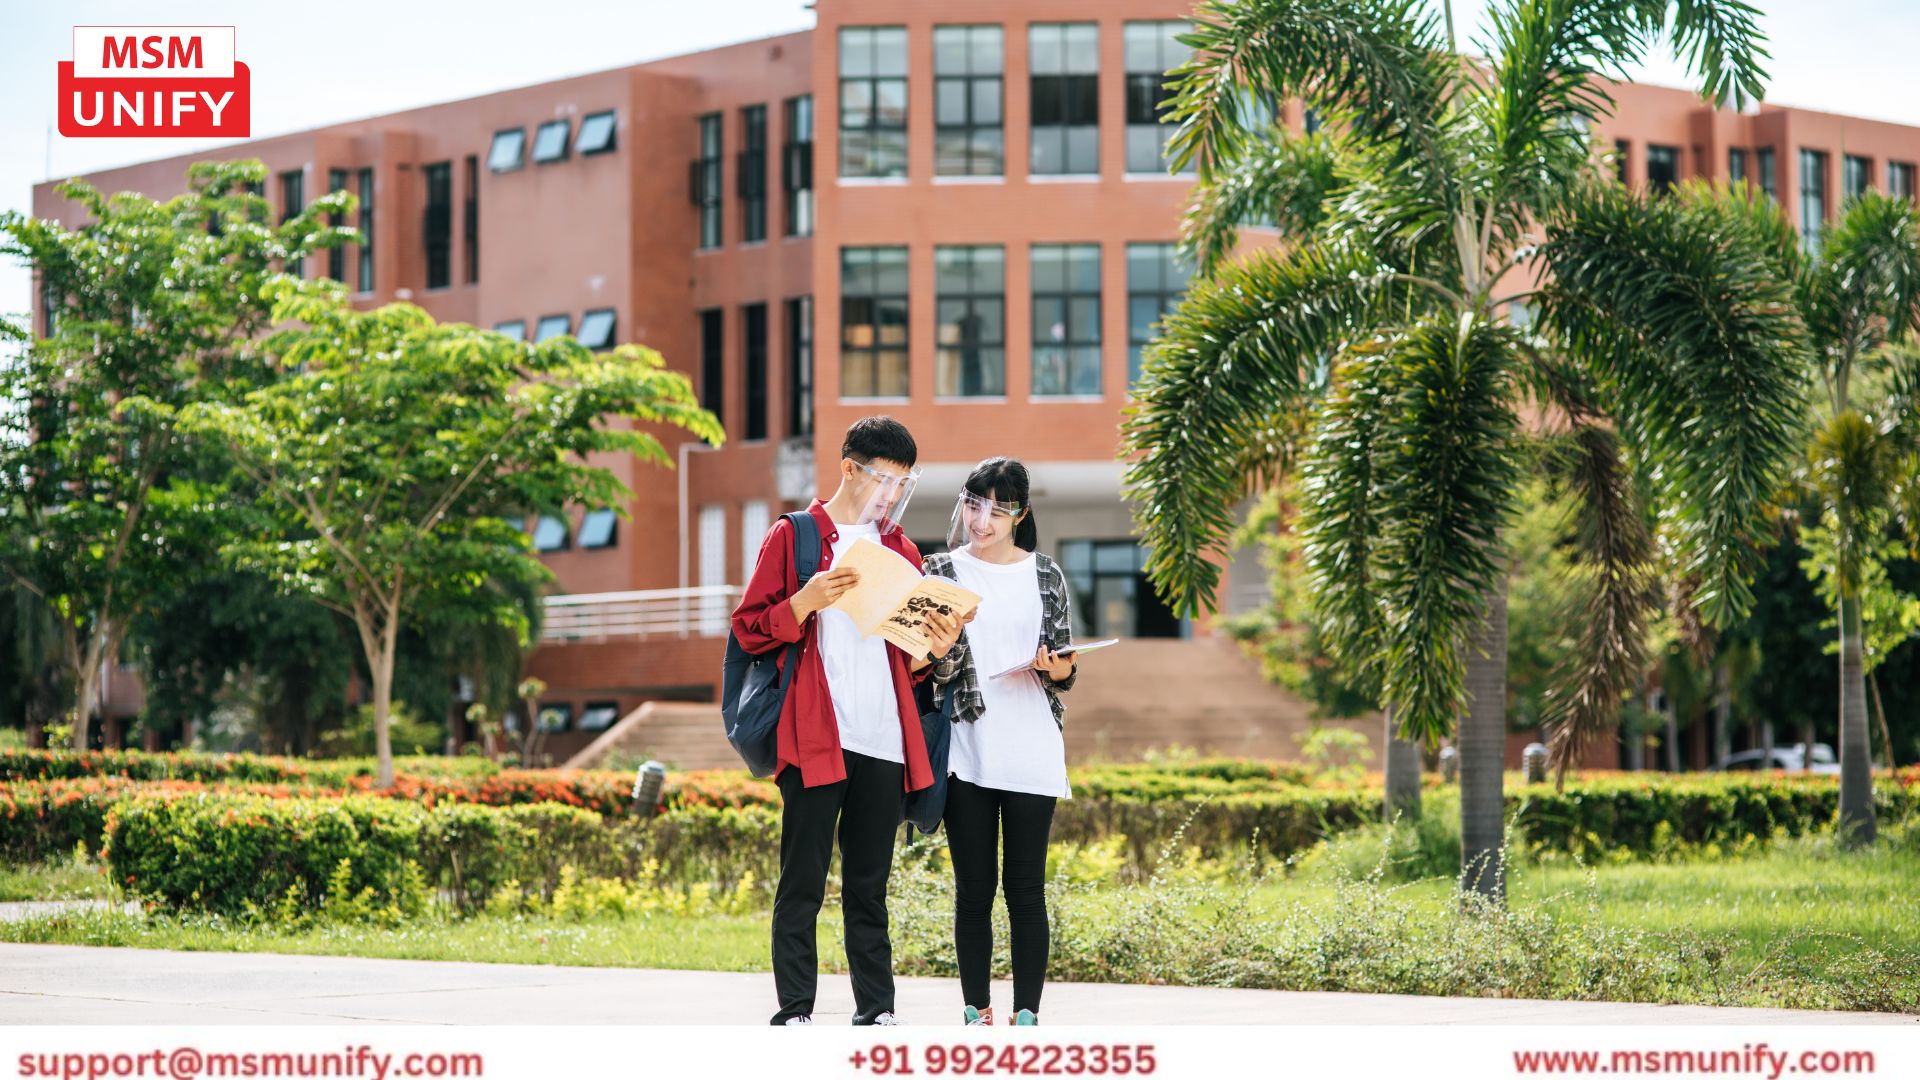 Take your academic aspirations to new heights with Malaysia's renowned universities and diverse learning opportunities. Open doors to endless possibilities by choosing to <a href="https://www.msmunify.com/study-in-malaysia/">study in Malaysia </a> for your education. Start your adventure today.
